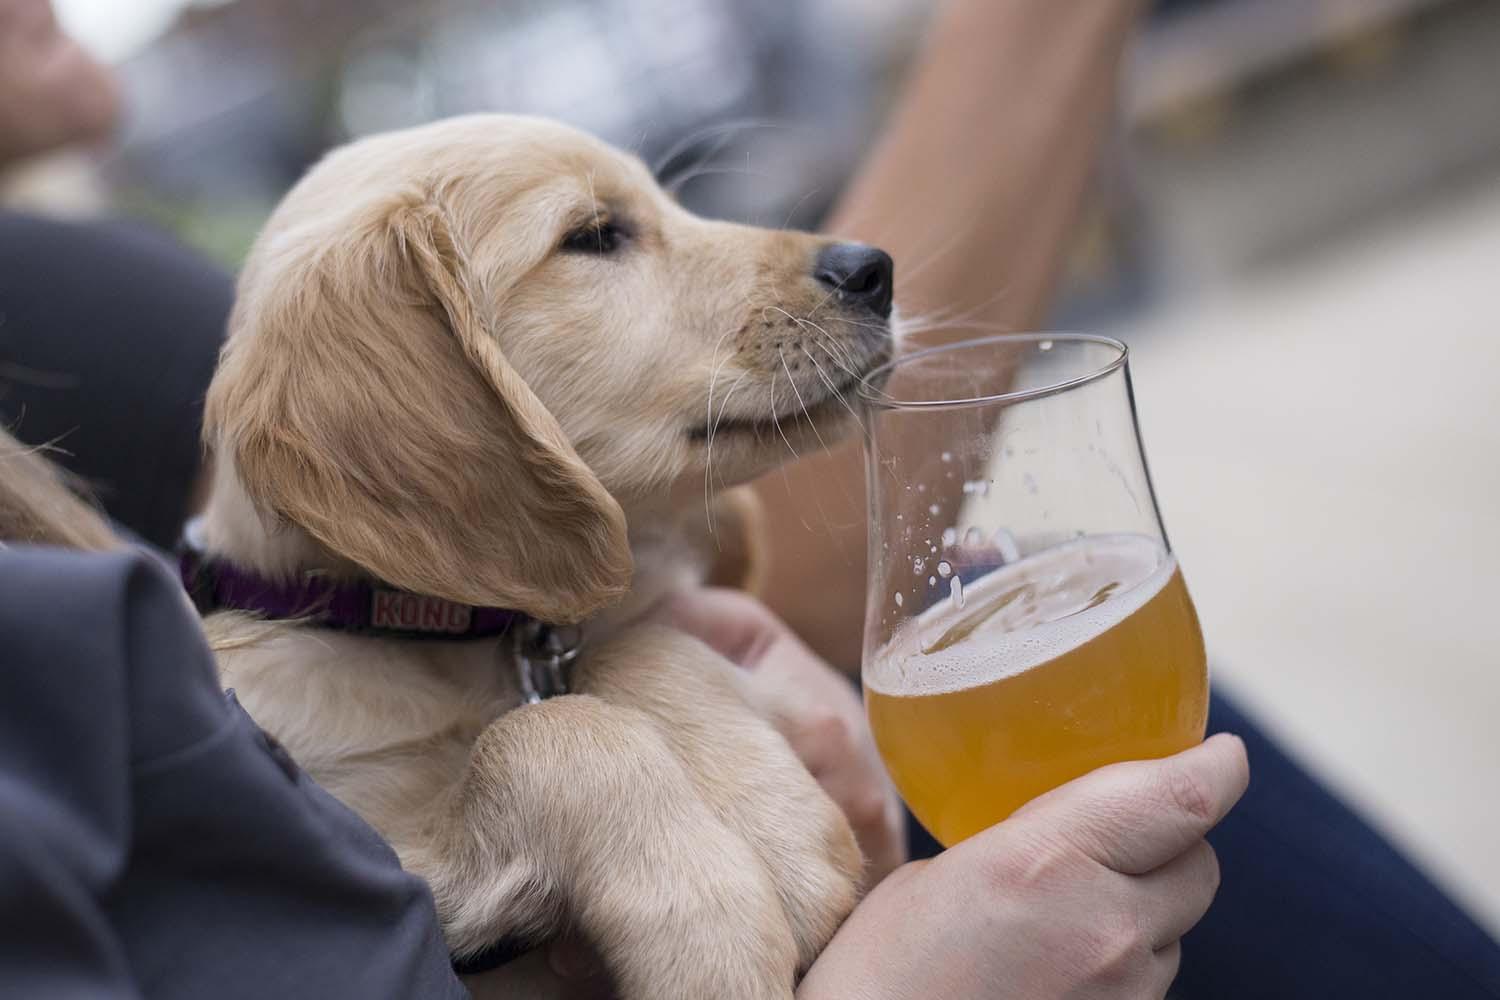 A person holding a dog and a glass of beer.